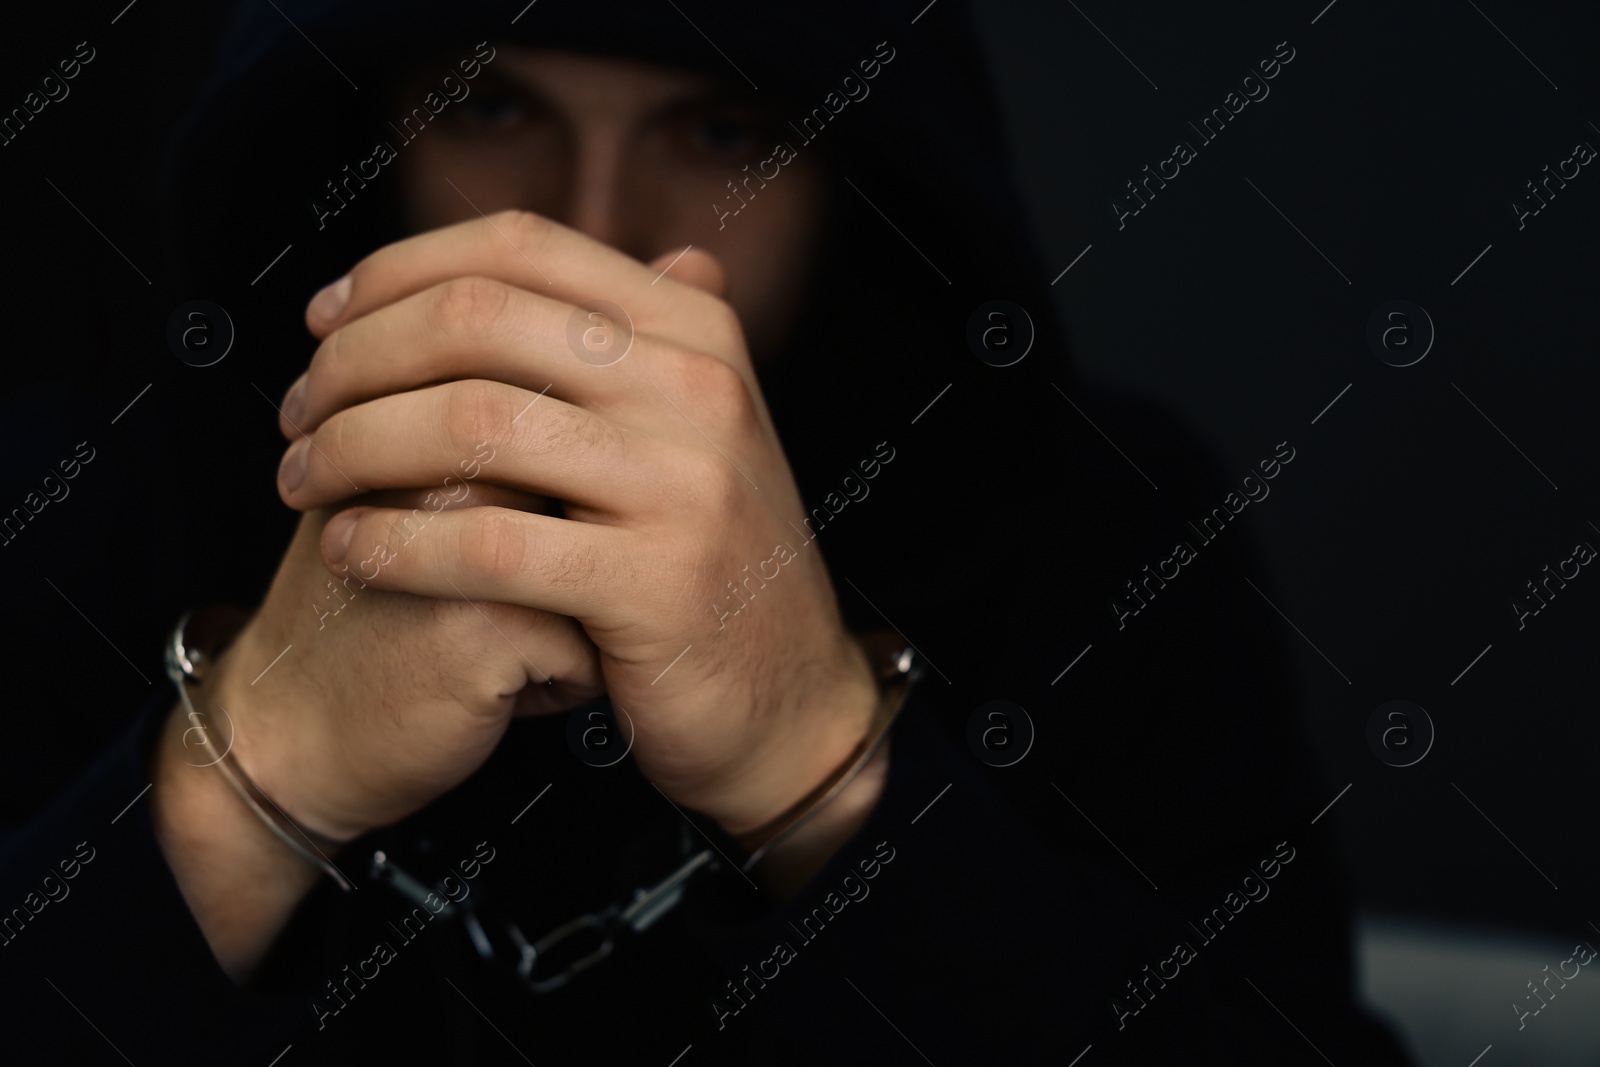 Photo of Man detained in handcuffs against dark background. Criminal law